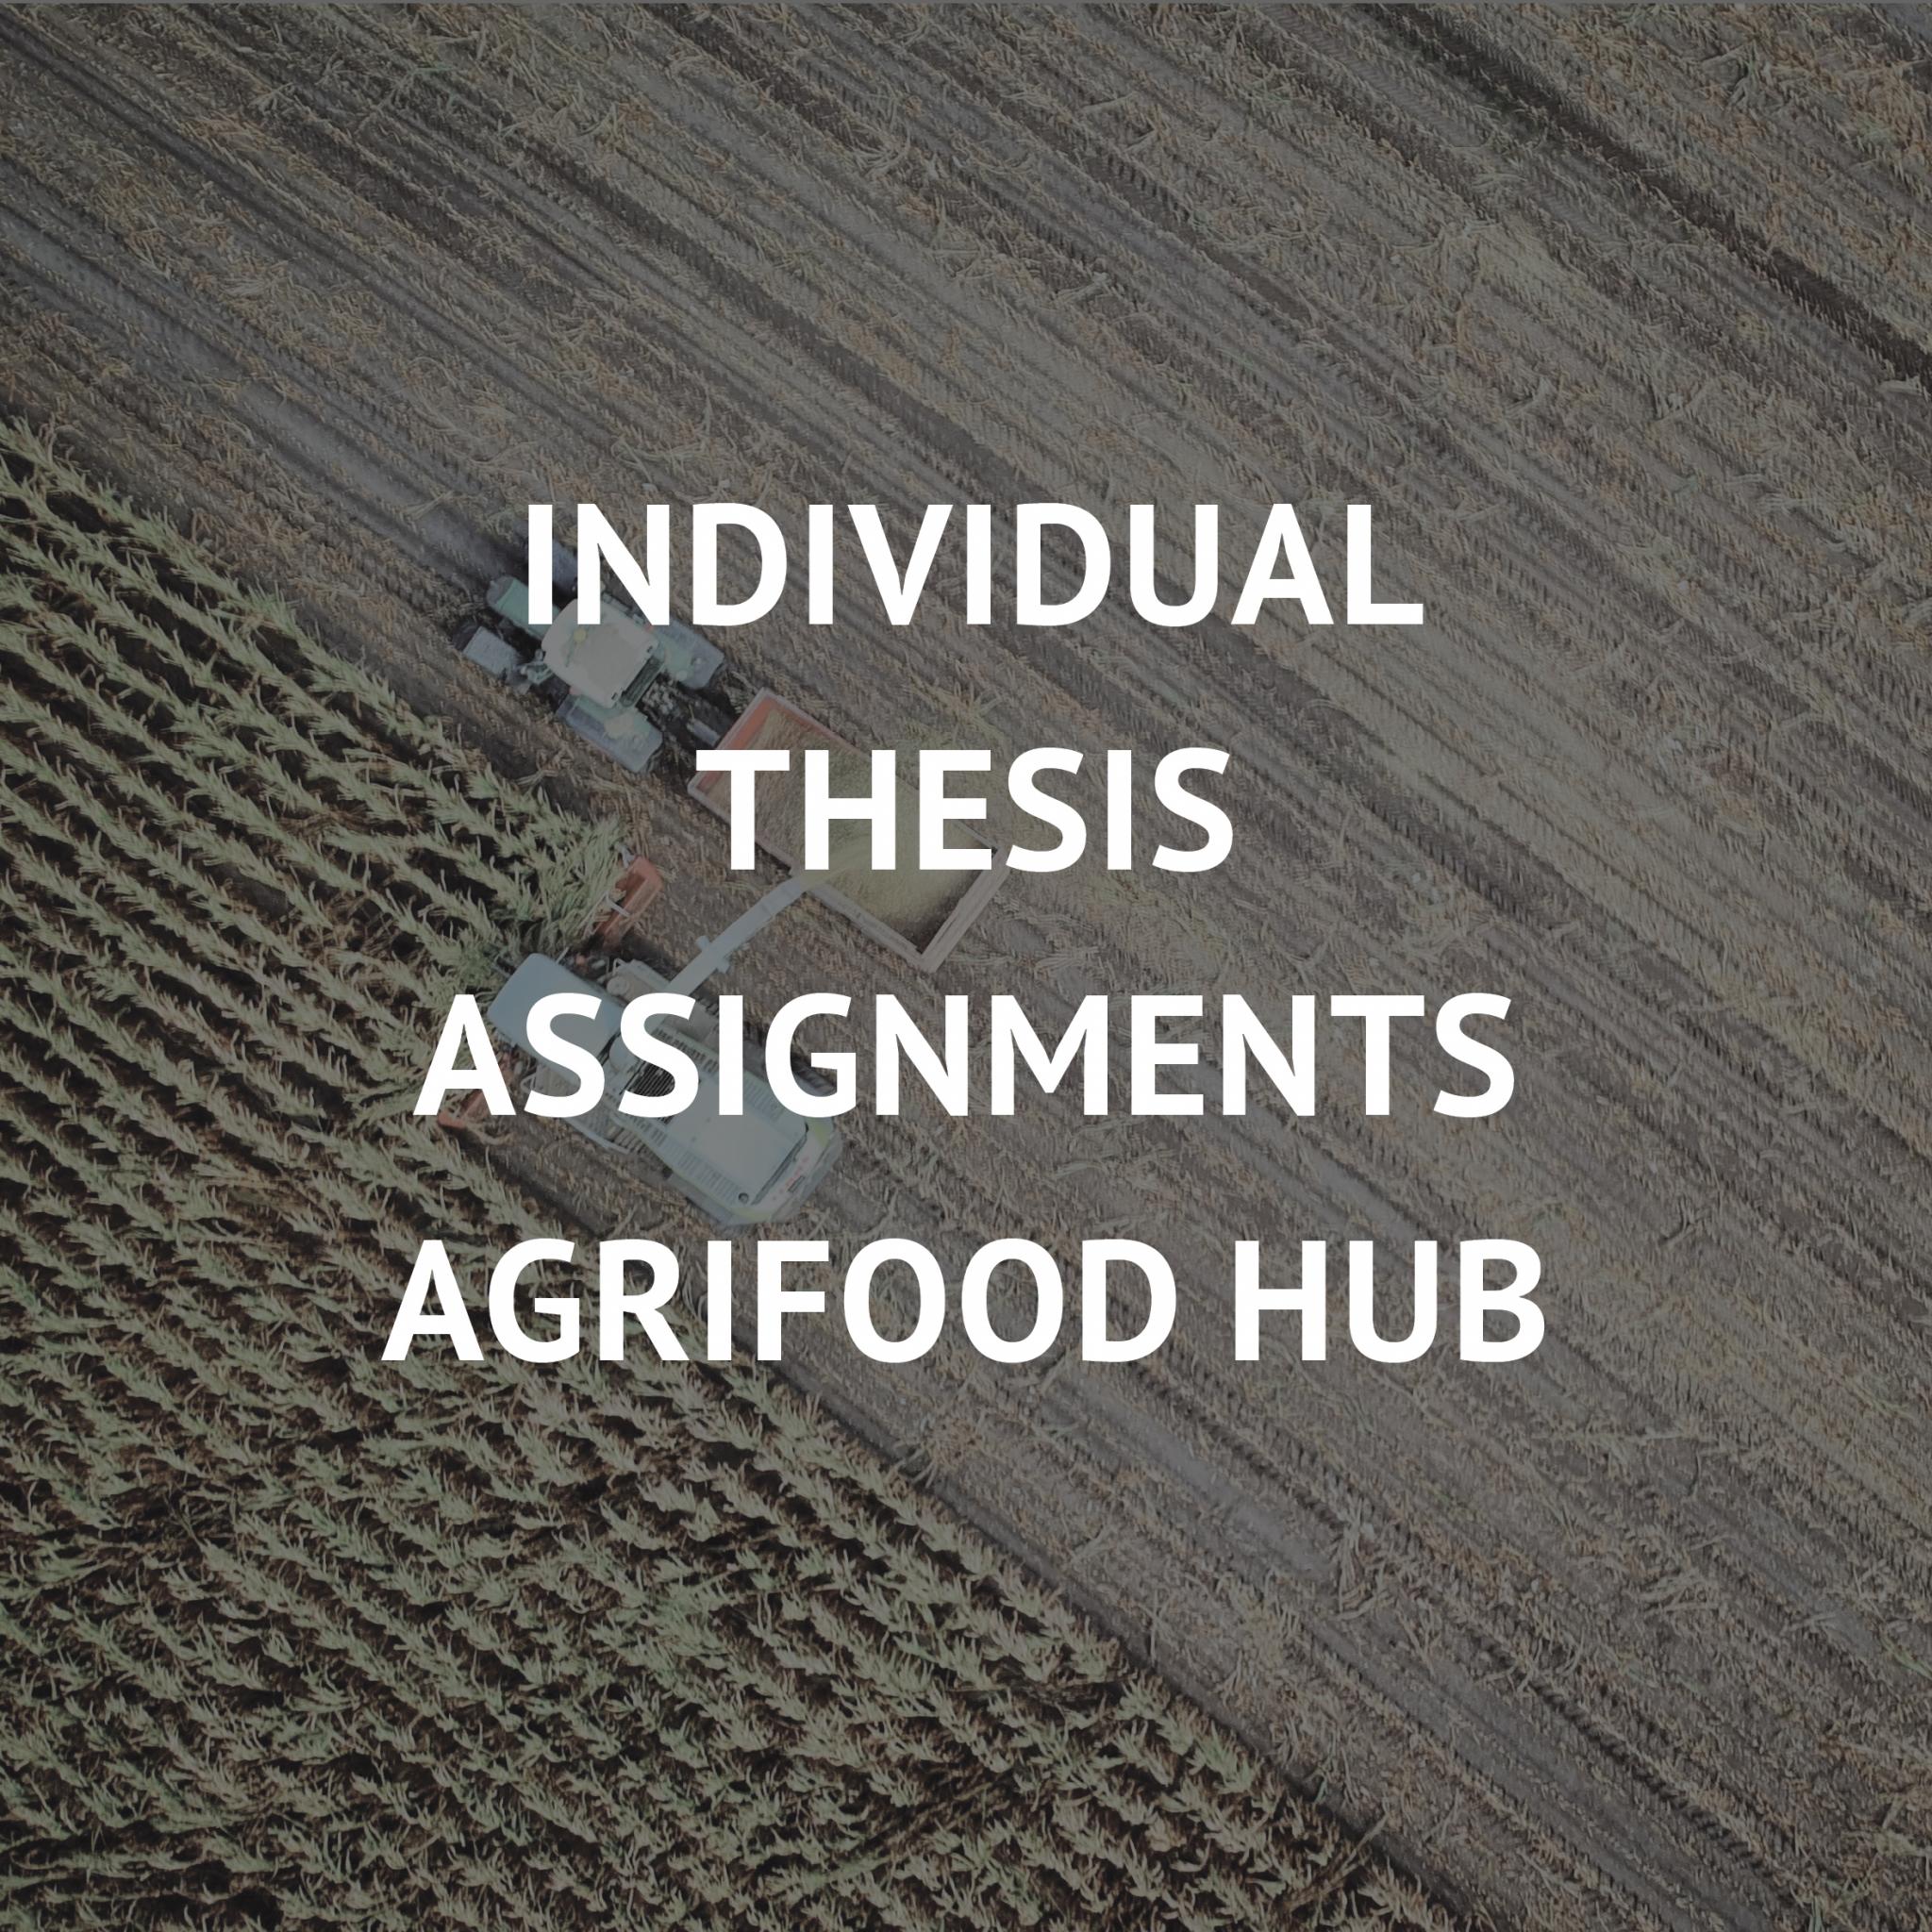 Individual Assignments Agrifood Hub